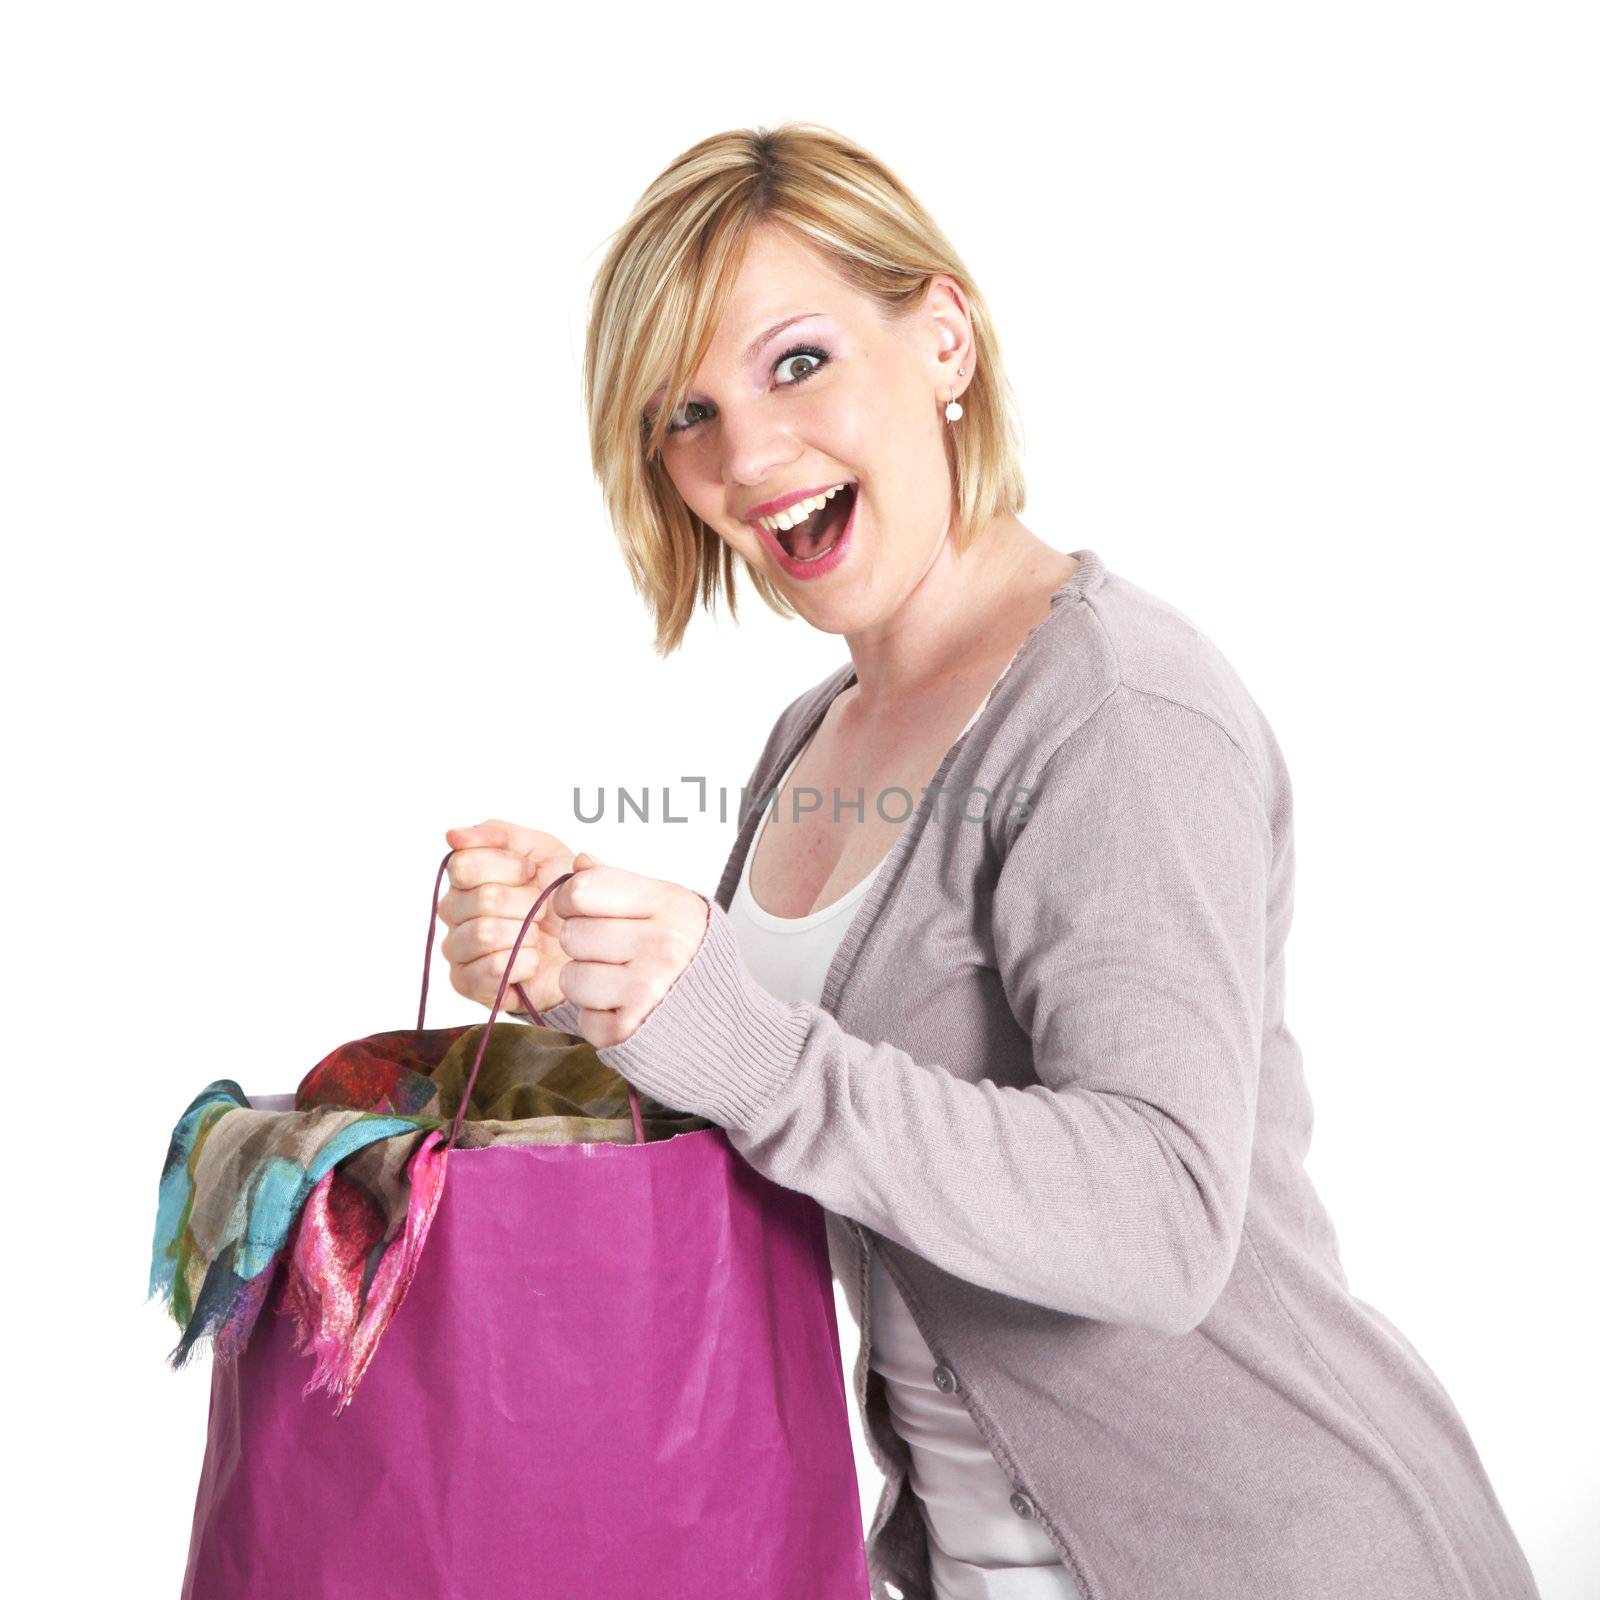 Ecstatic shopaholic with full carrier bag  by Farina6000